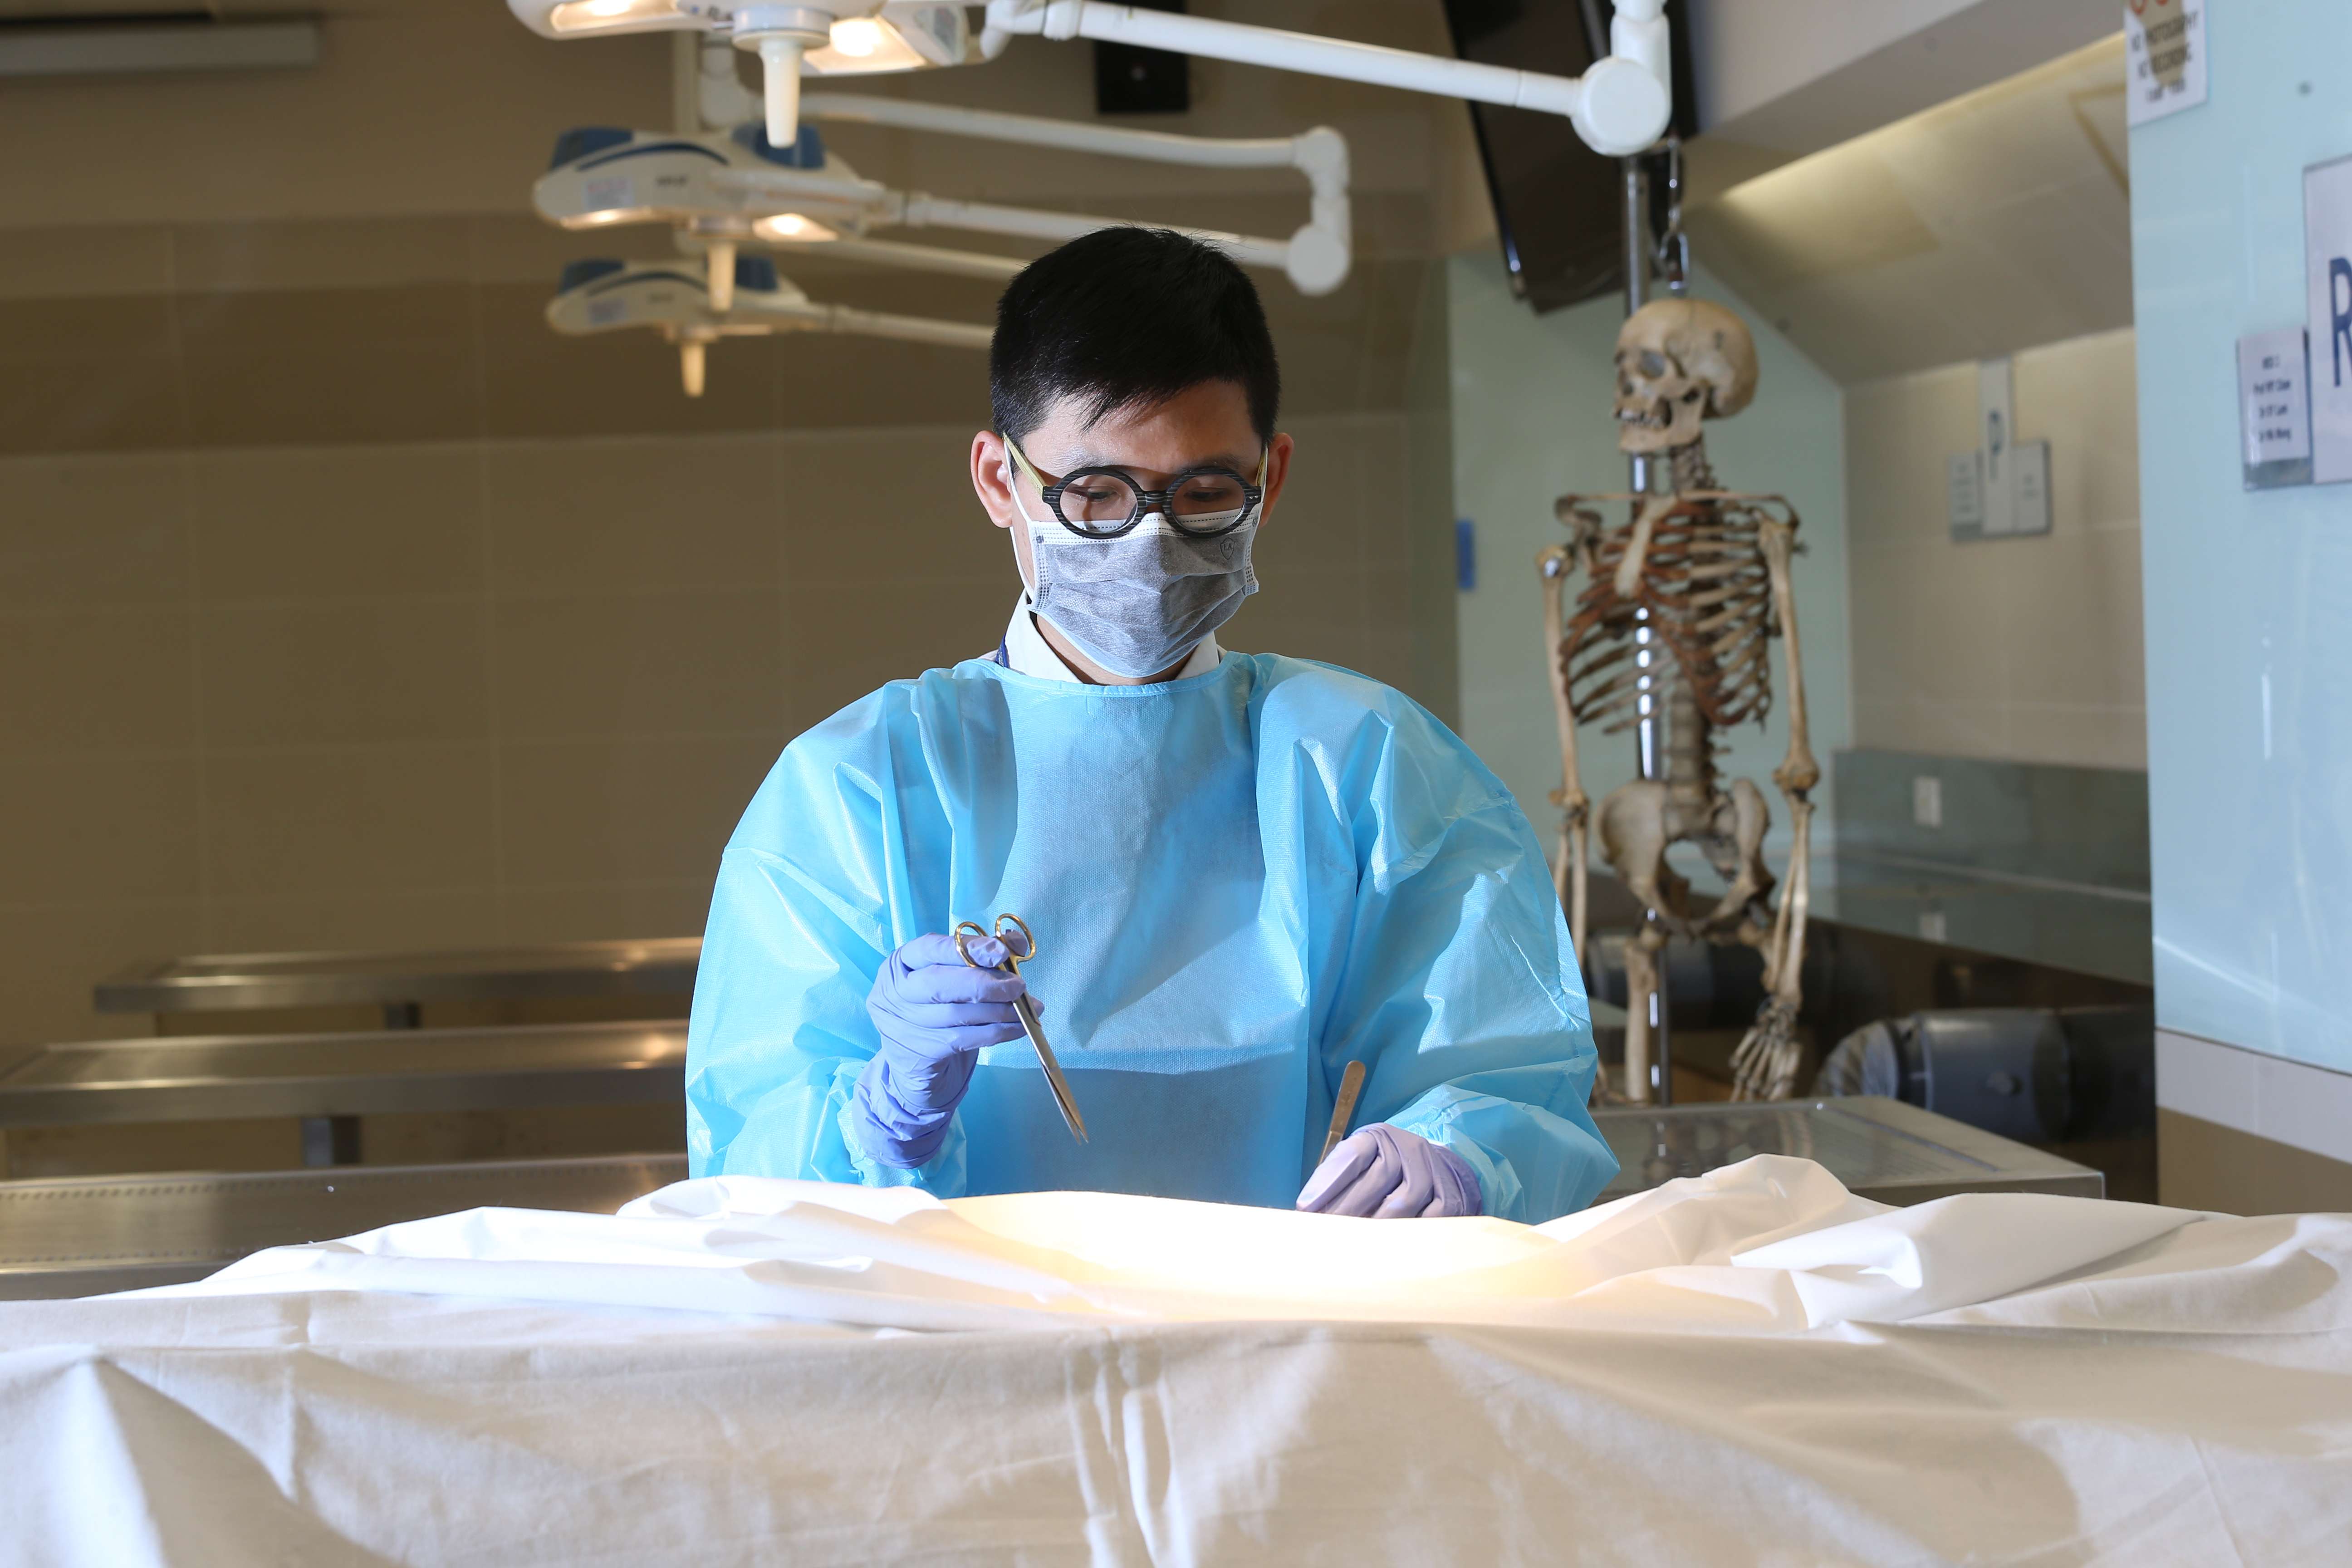 Former graphic designer Pasu Ng is in charge of the dissecting room at the Chinese University of Hong Kong’s medical school. Photo: K.Y. Cheng